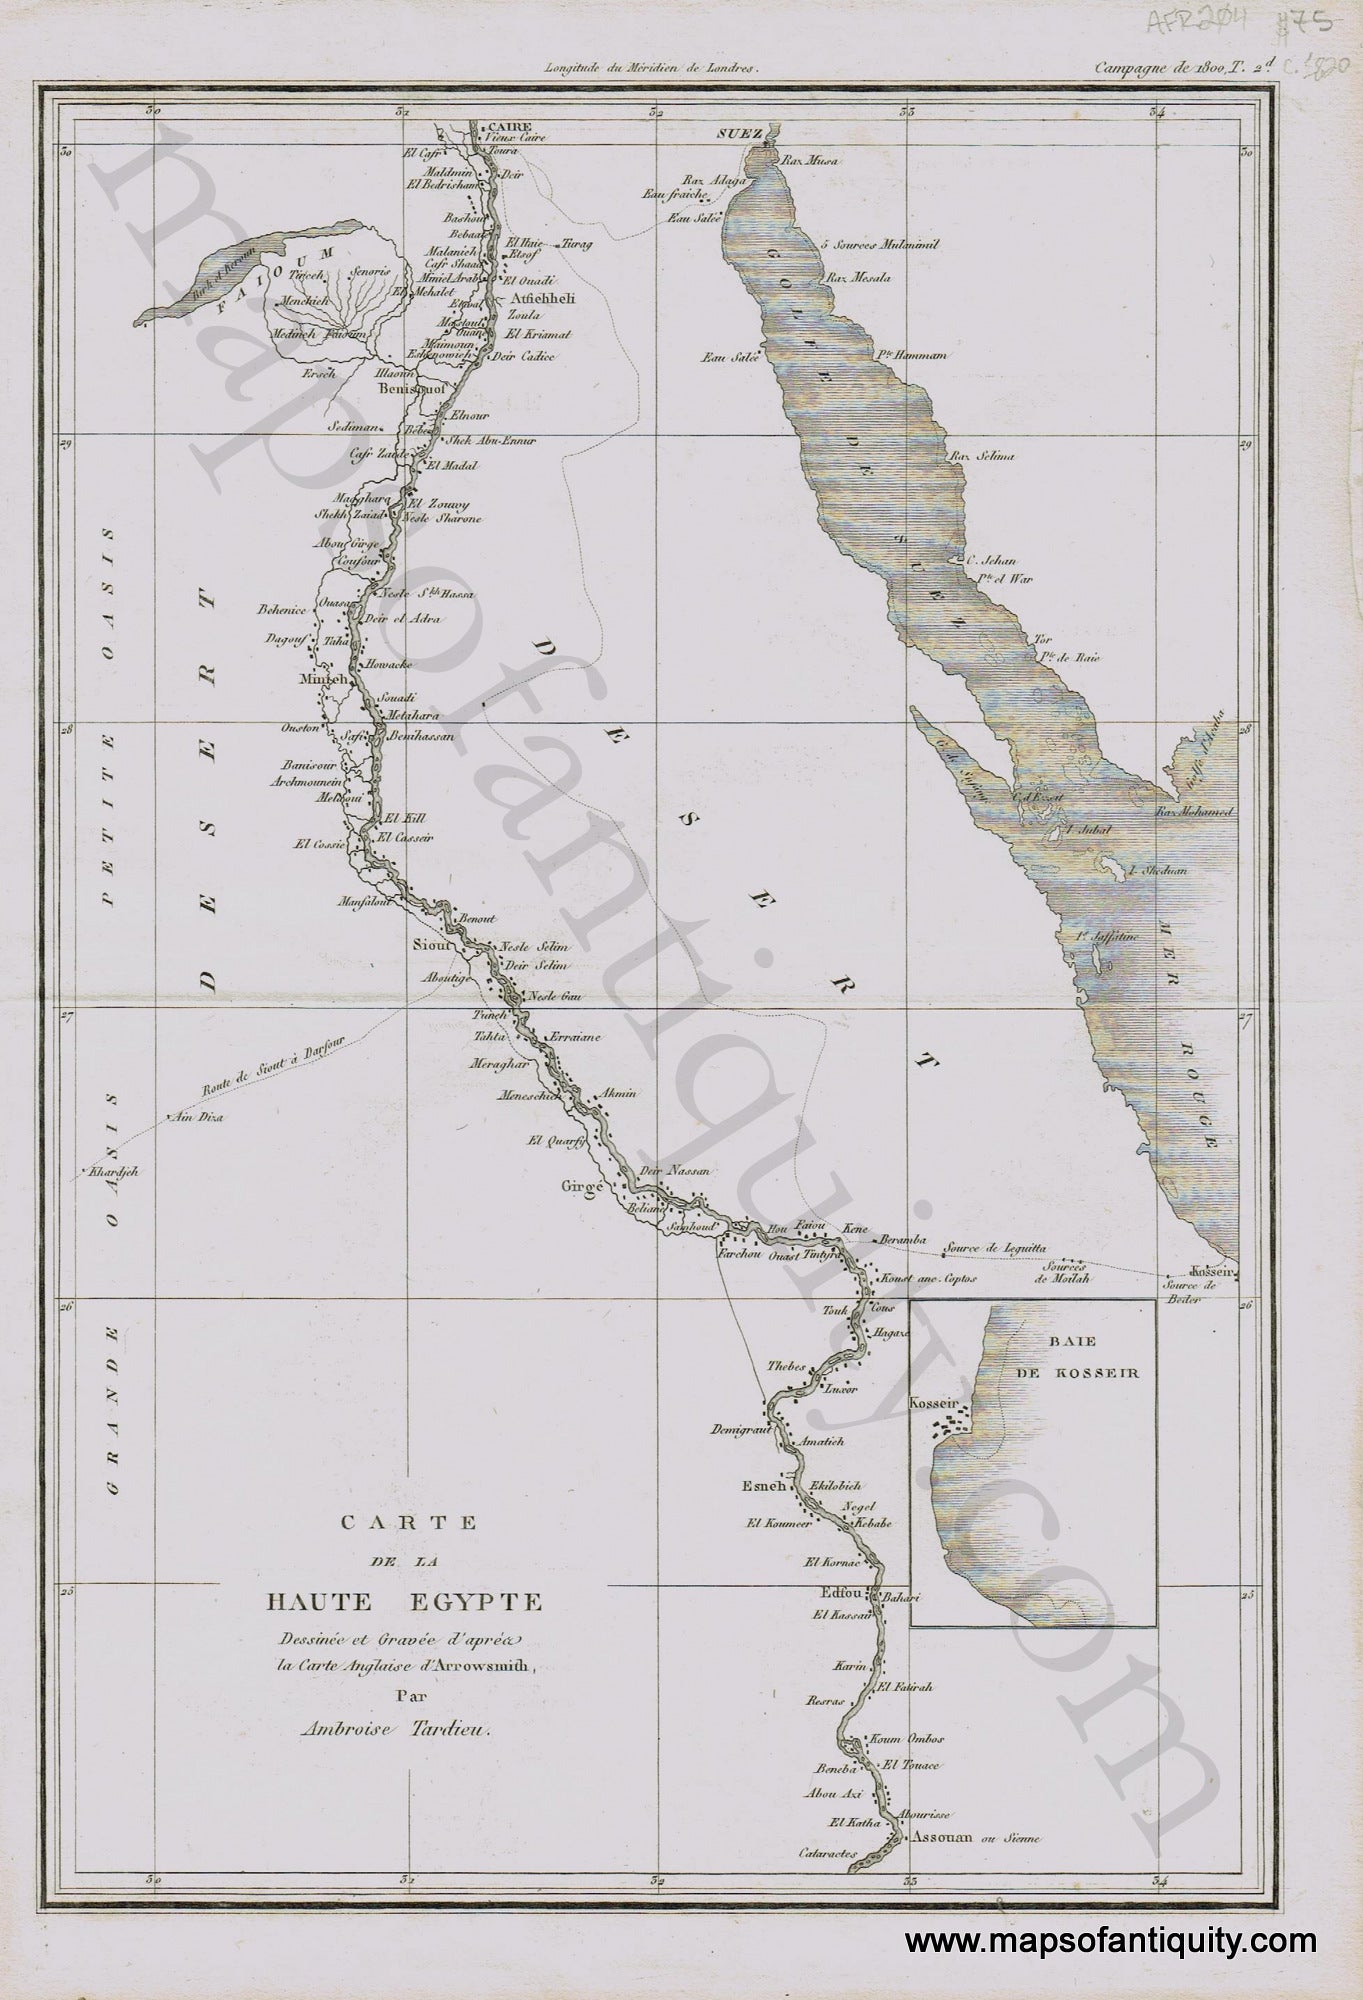 Antique-Map-Carte-de-la-Haute-Egypte-Egypt-North-Northern-Africa-African-Nile-River-Basin-Tardieu-1820s-1800s-Early-19th-Century-Maps-of-Antiquity